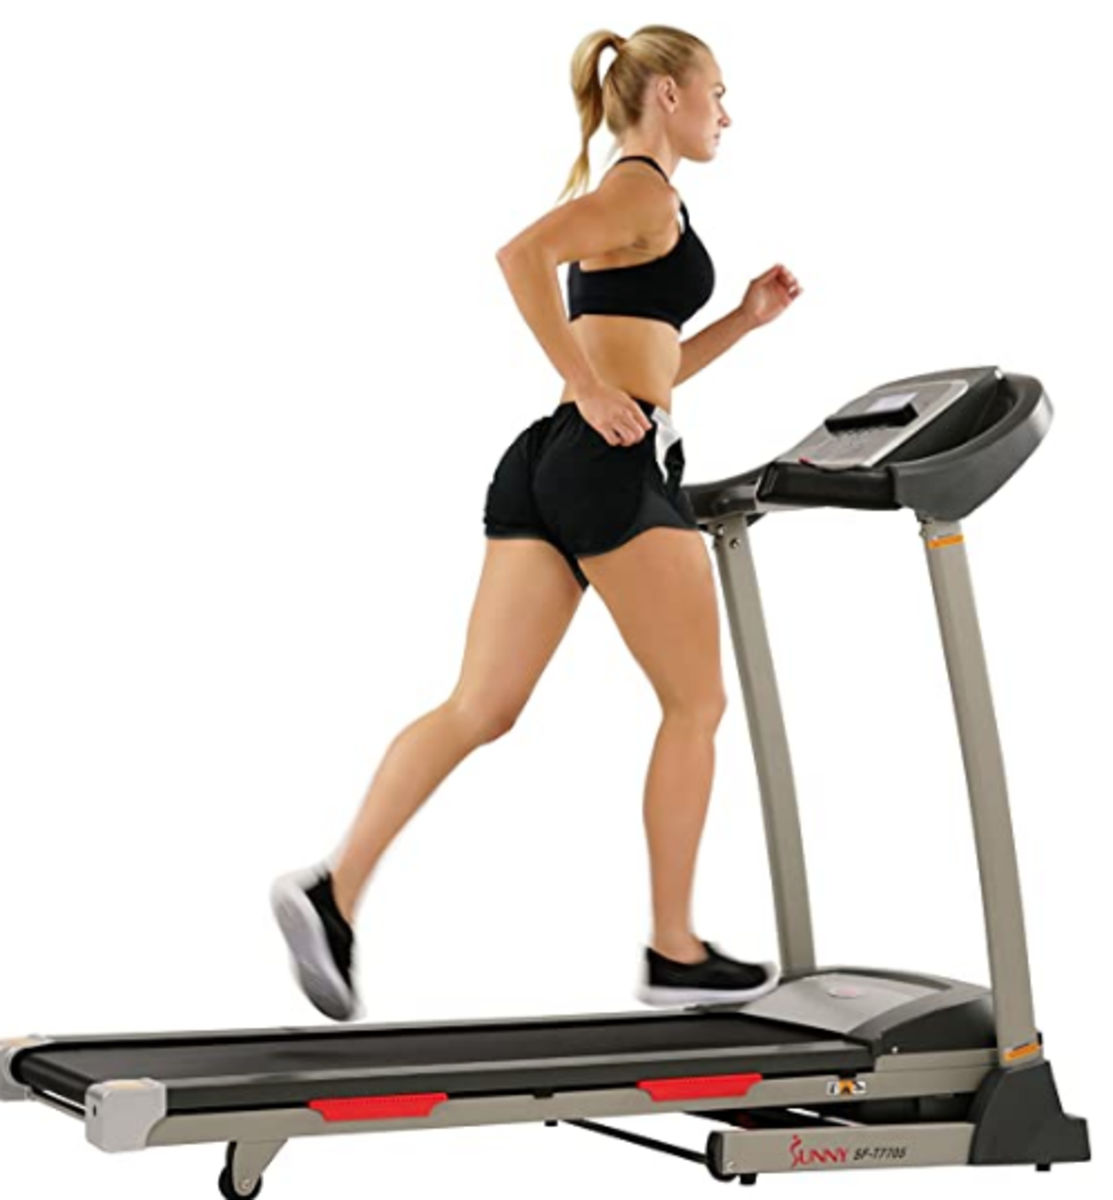 nordictrack-t-65s-treadmill-whats-good-whats-bad